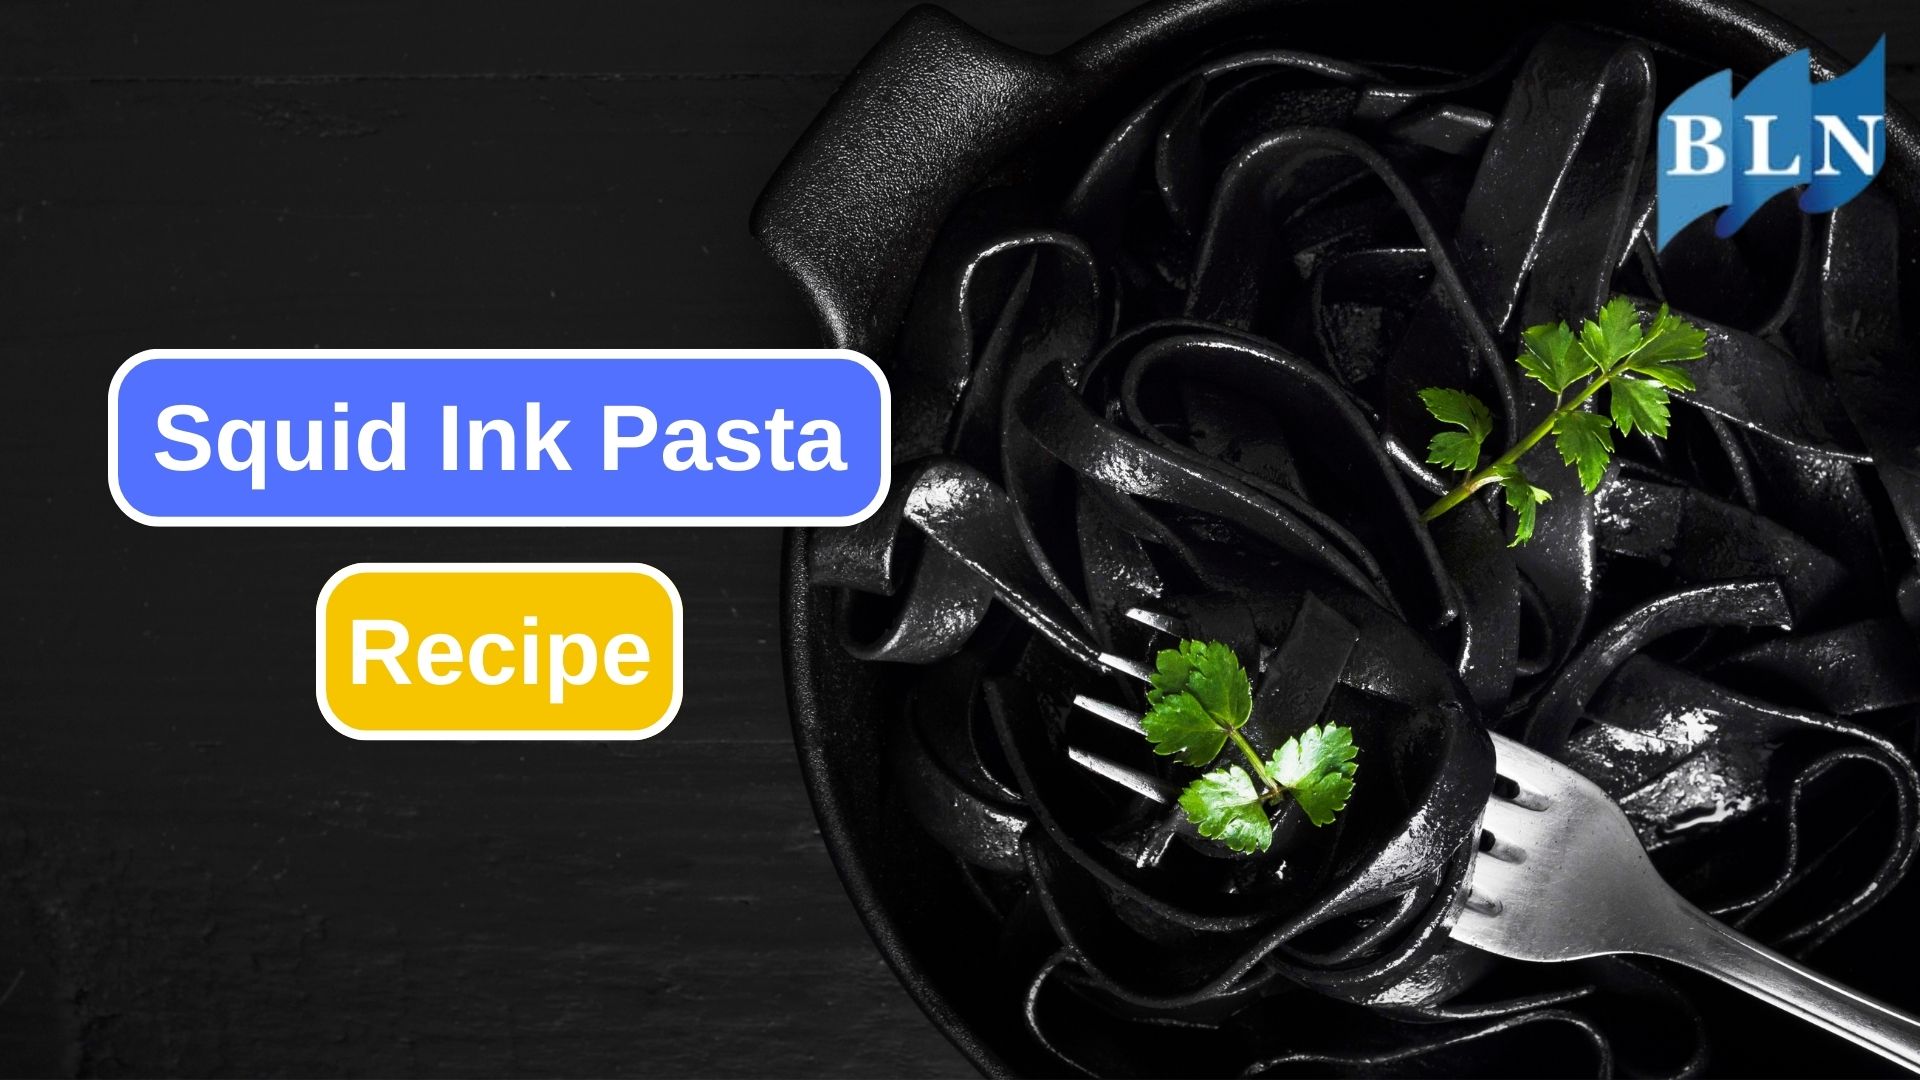 Try This Easy Squid Ink Pasta Recipe at Home